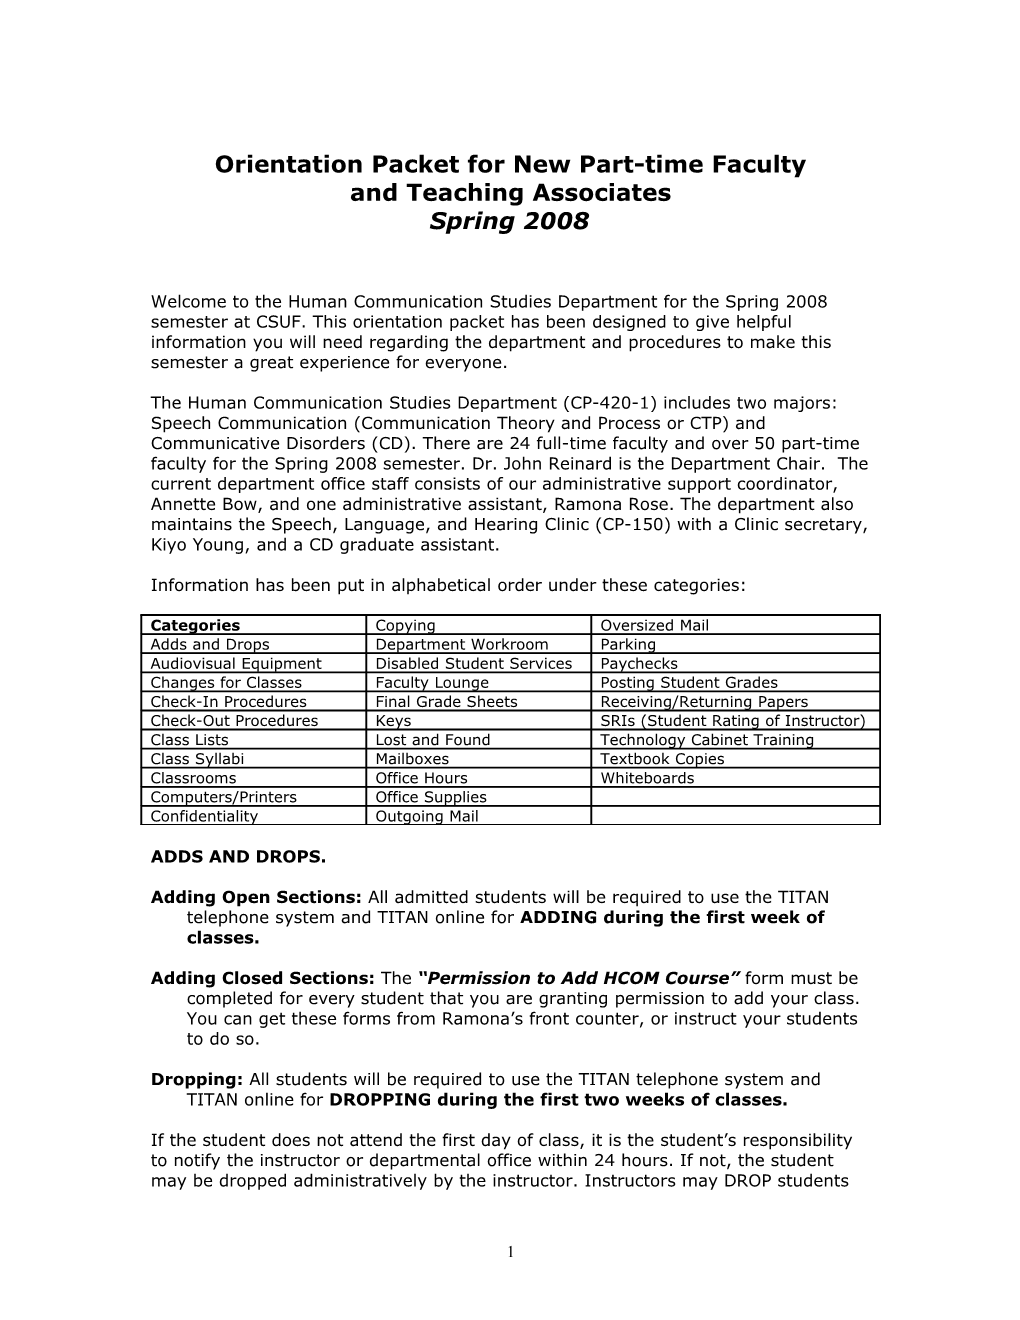 Orientation Packet for New Part-Time Faculty